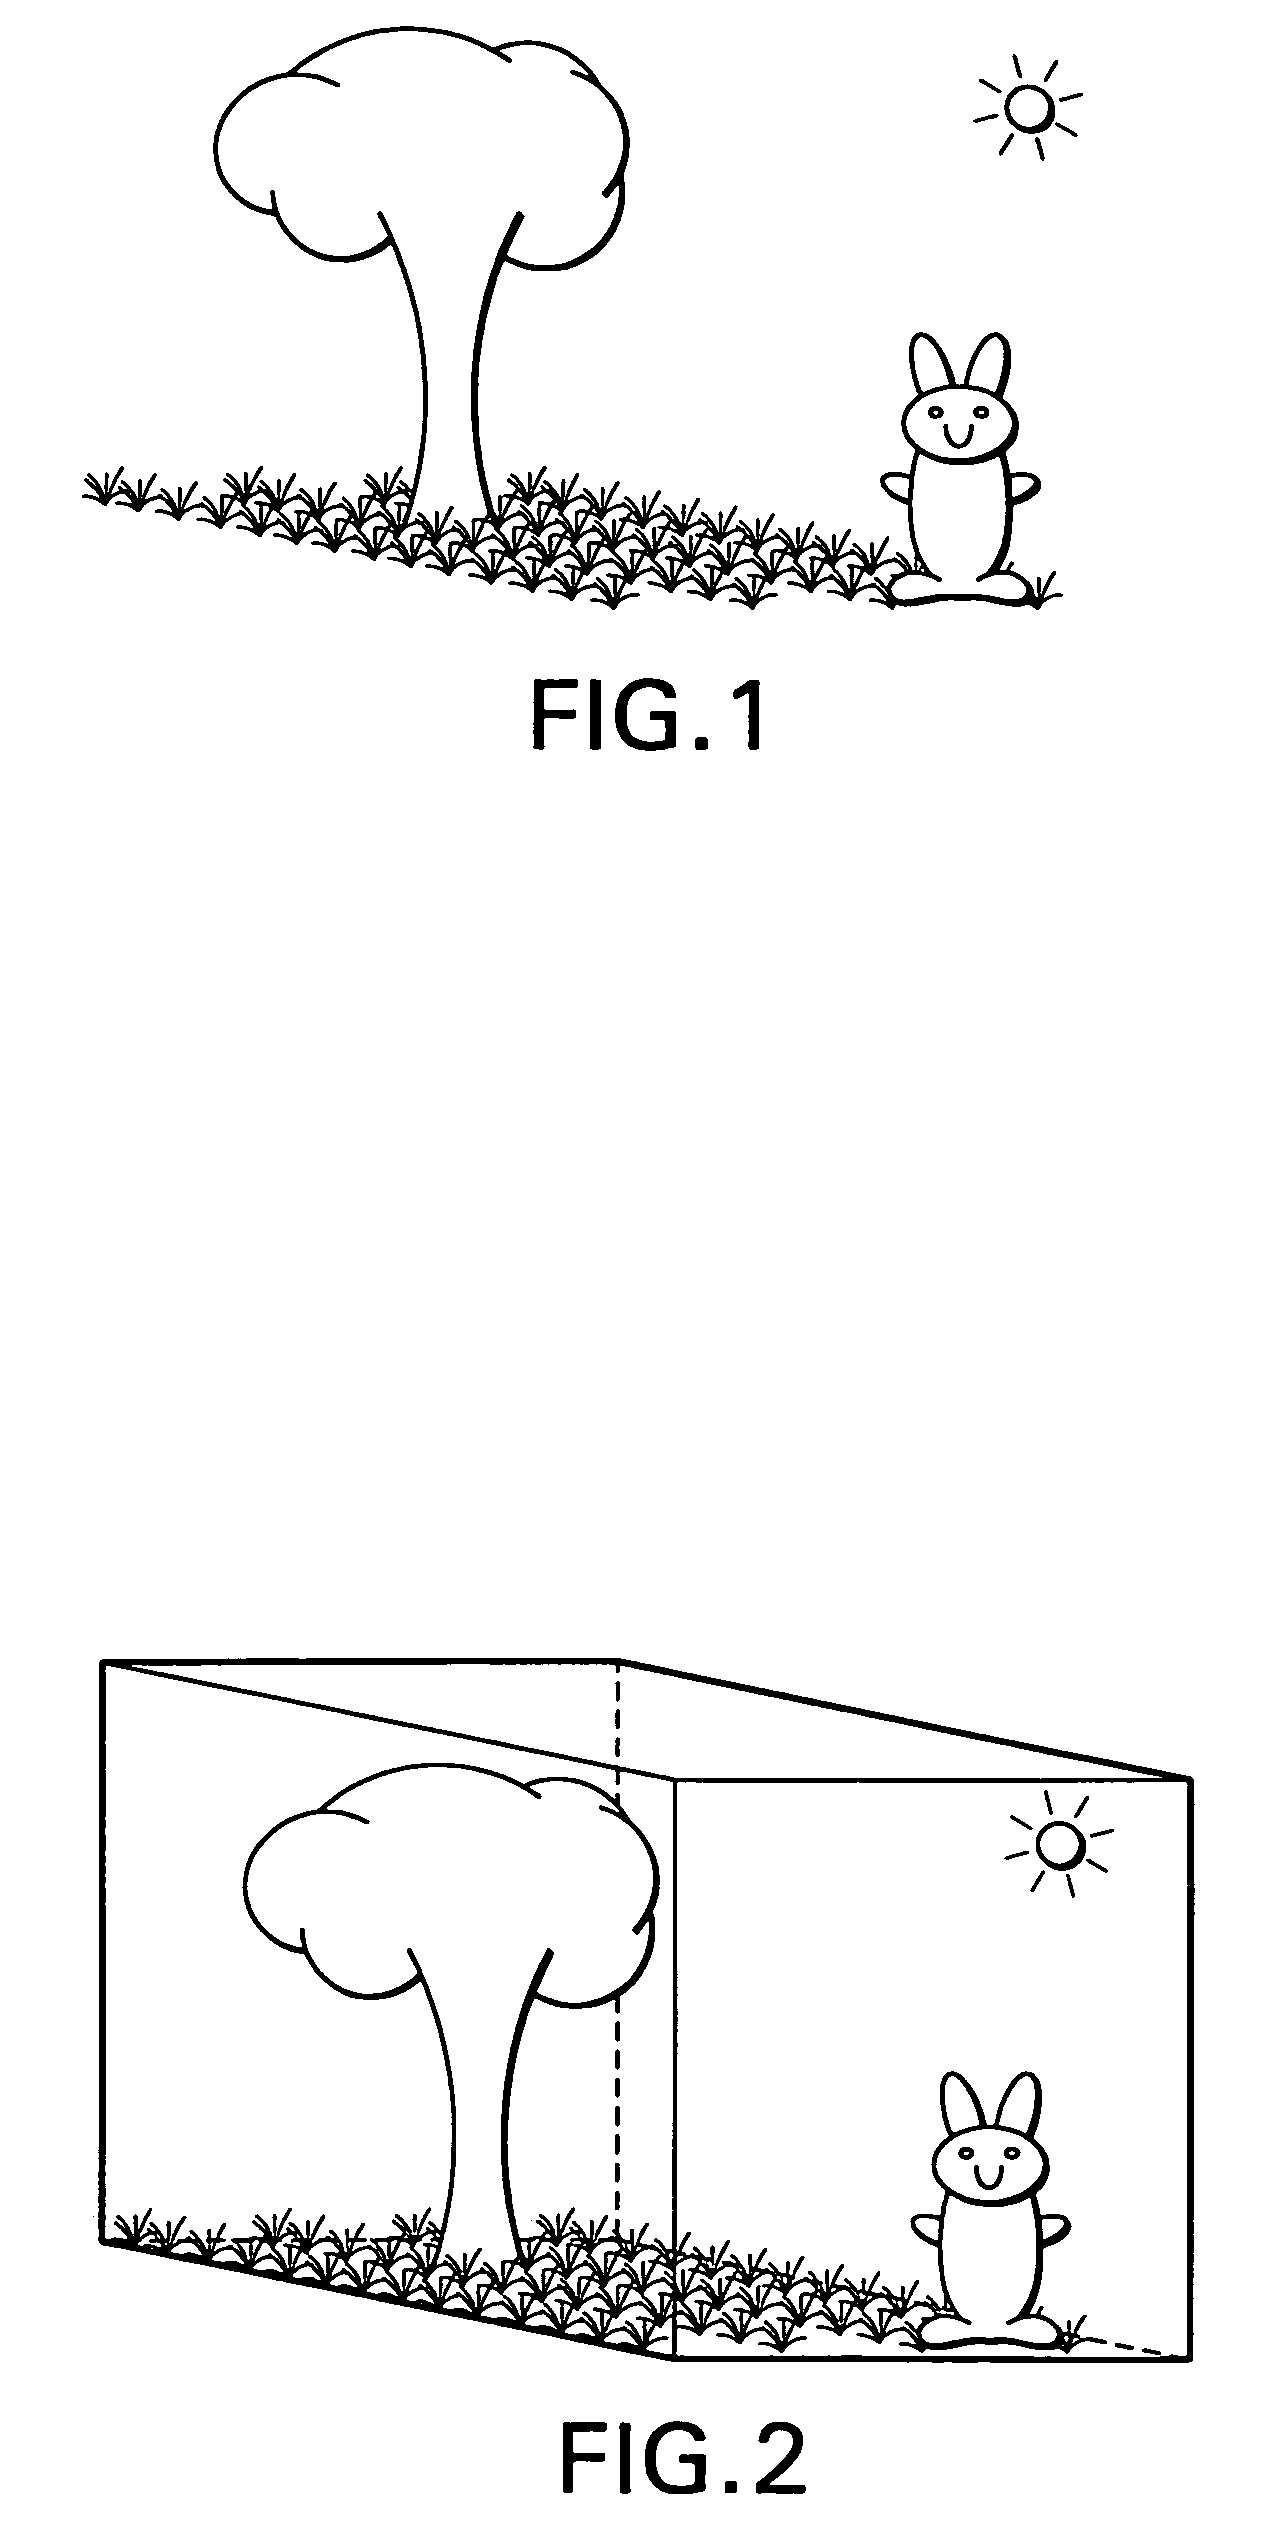 Method and system for presenting three-dimensional computer graphics images using multiple graphics processing units